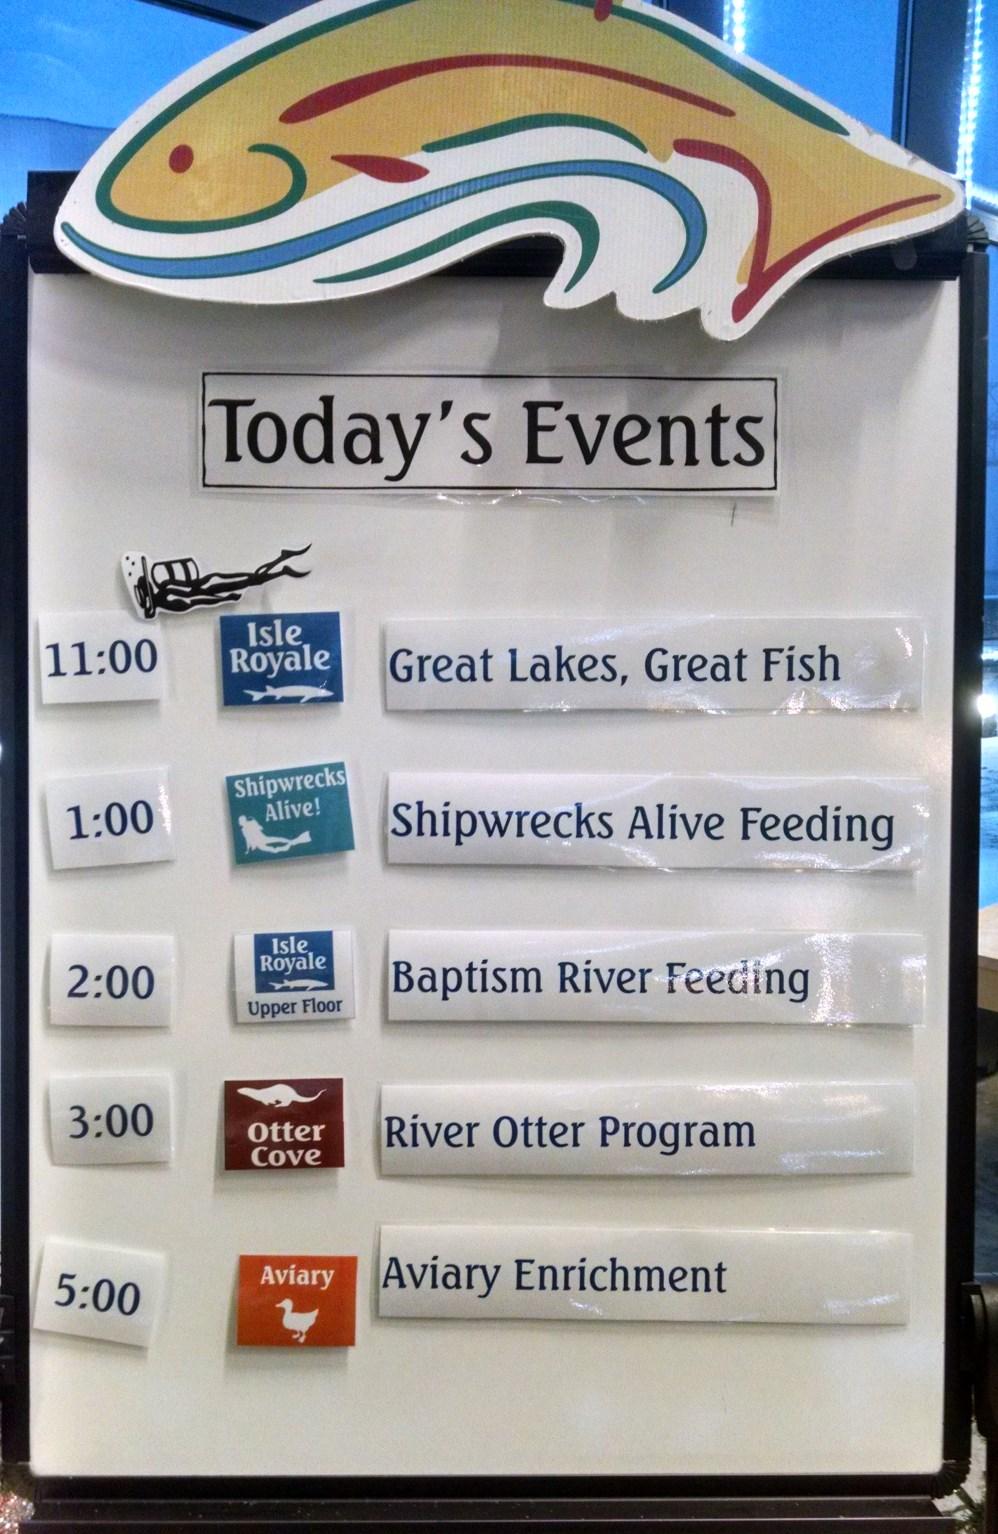 Before we start: Each day the aquarium has special shows.